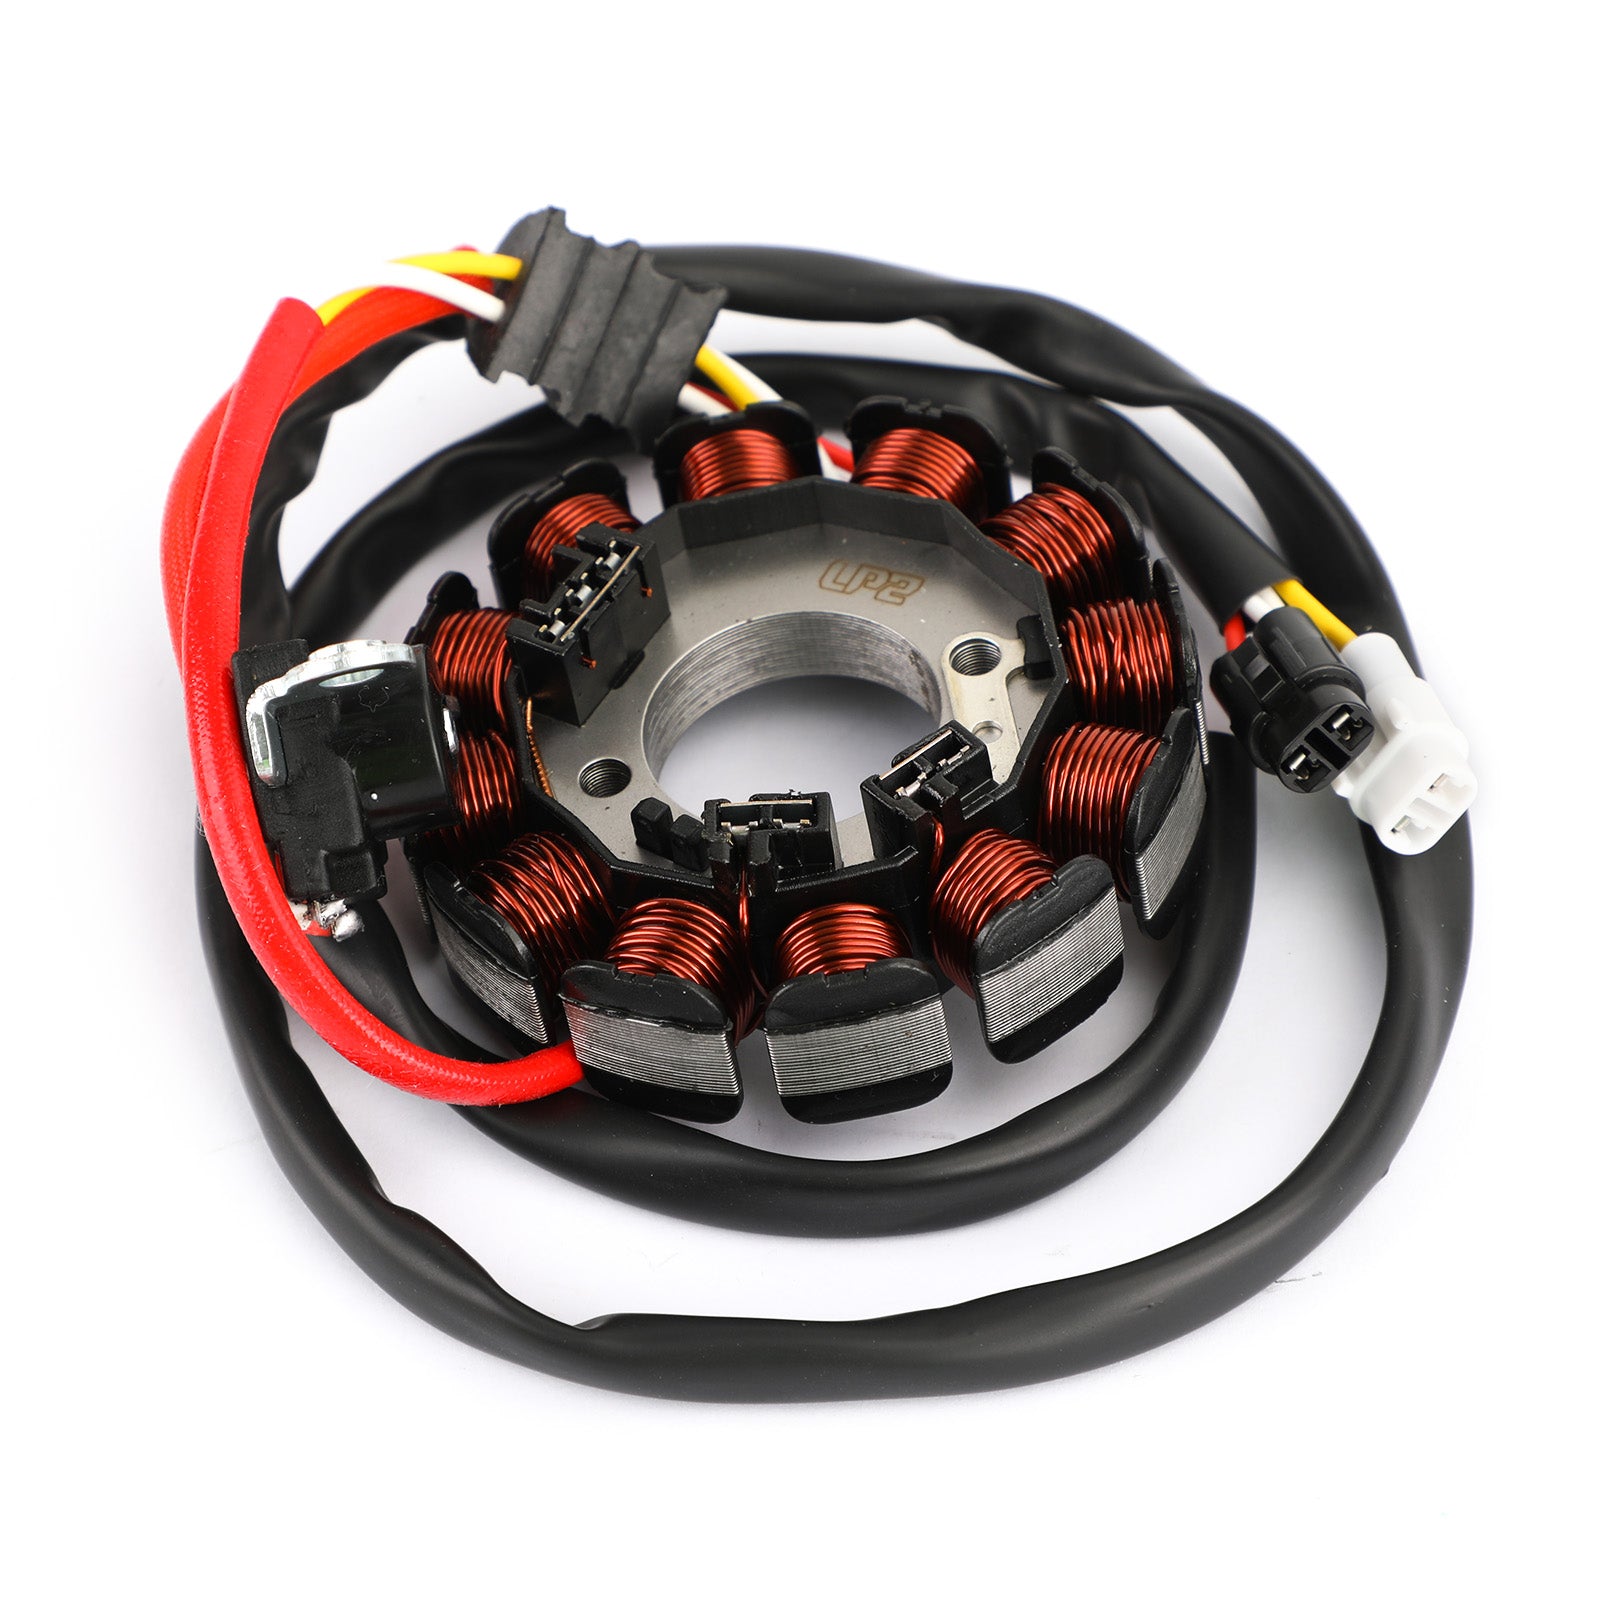 Magneto Generator Engine Stator Coil Fit For GAS GAS EC250F Enduro 4T 2013-2015 EC300F Racing 4T  EC300F Racing 4T 2015